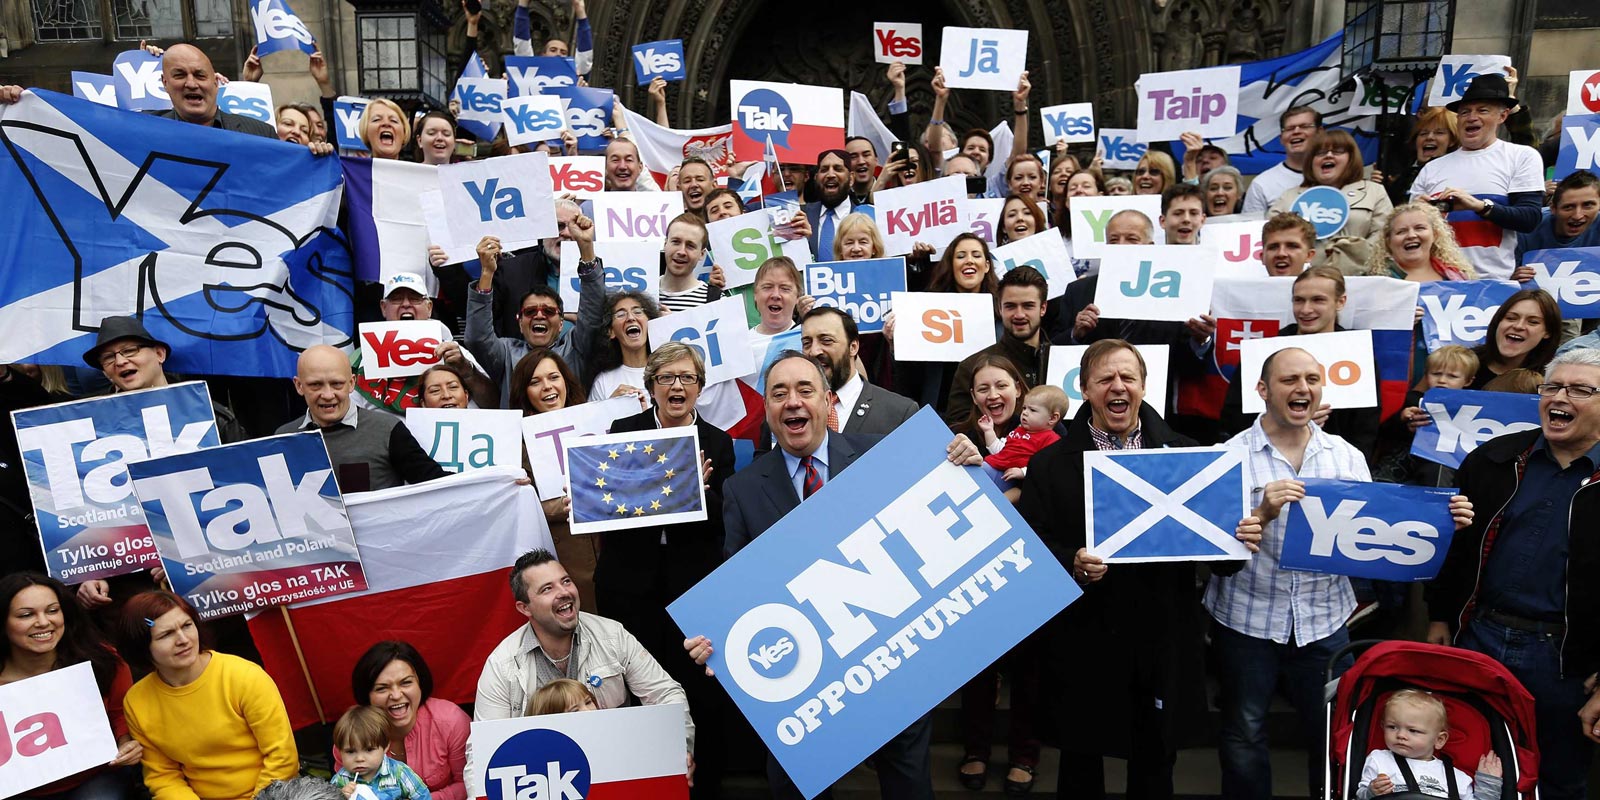 heres-how-david-cameron-blundered-into-letting-scotland-vote-on-its-own-independence